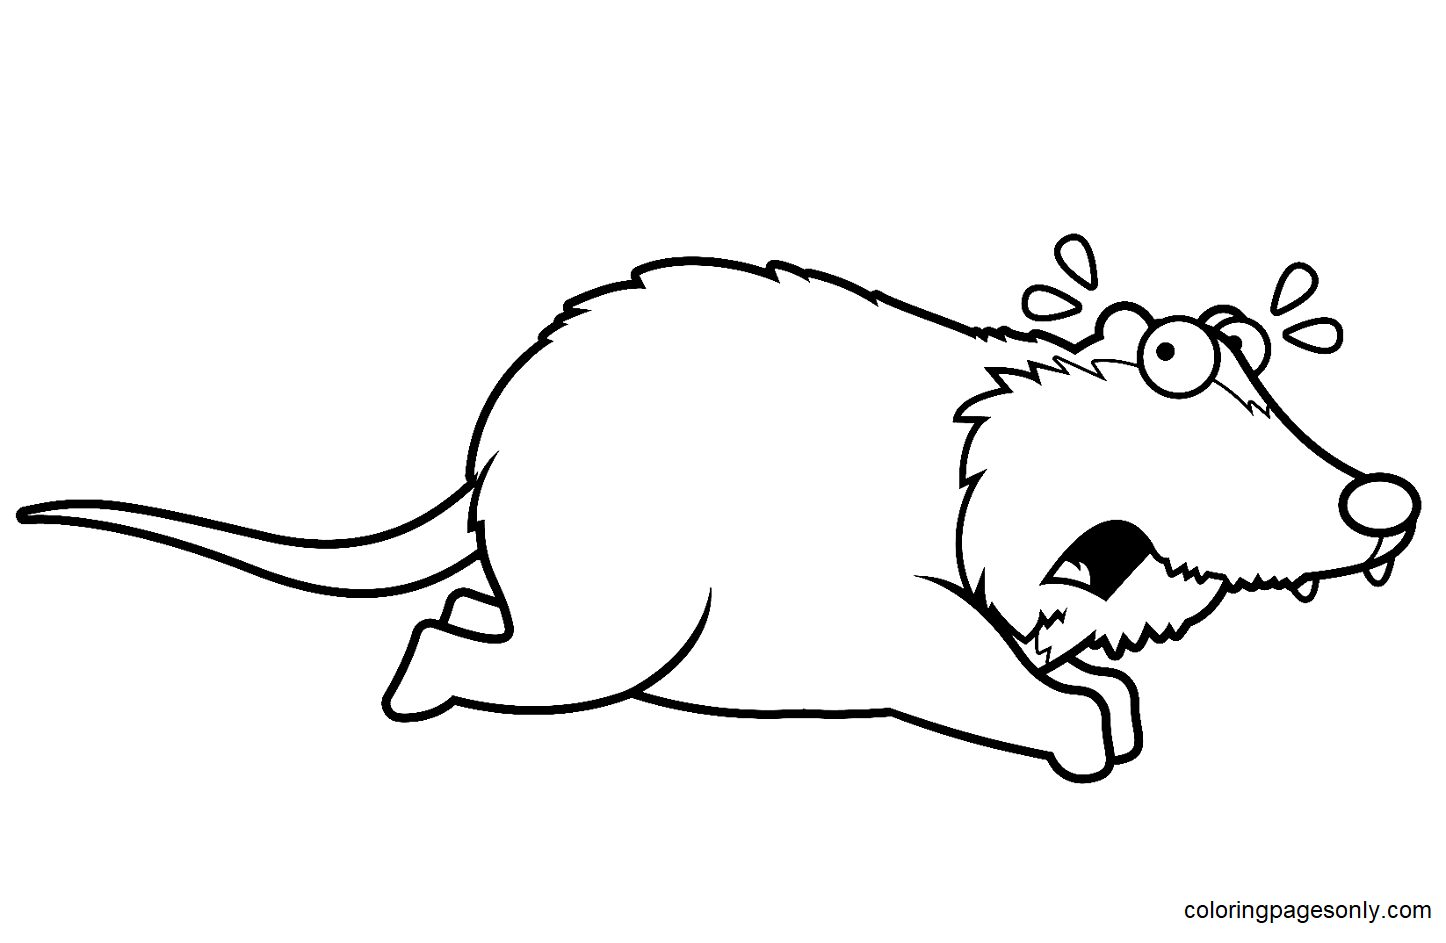 Funny Cartoon Opossum Coloring Page